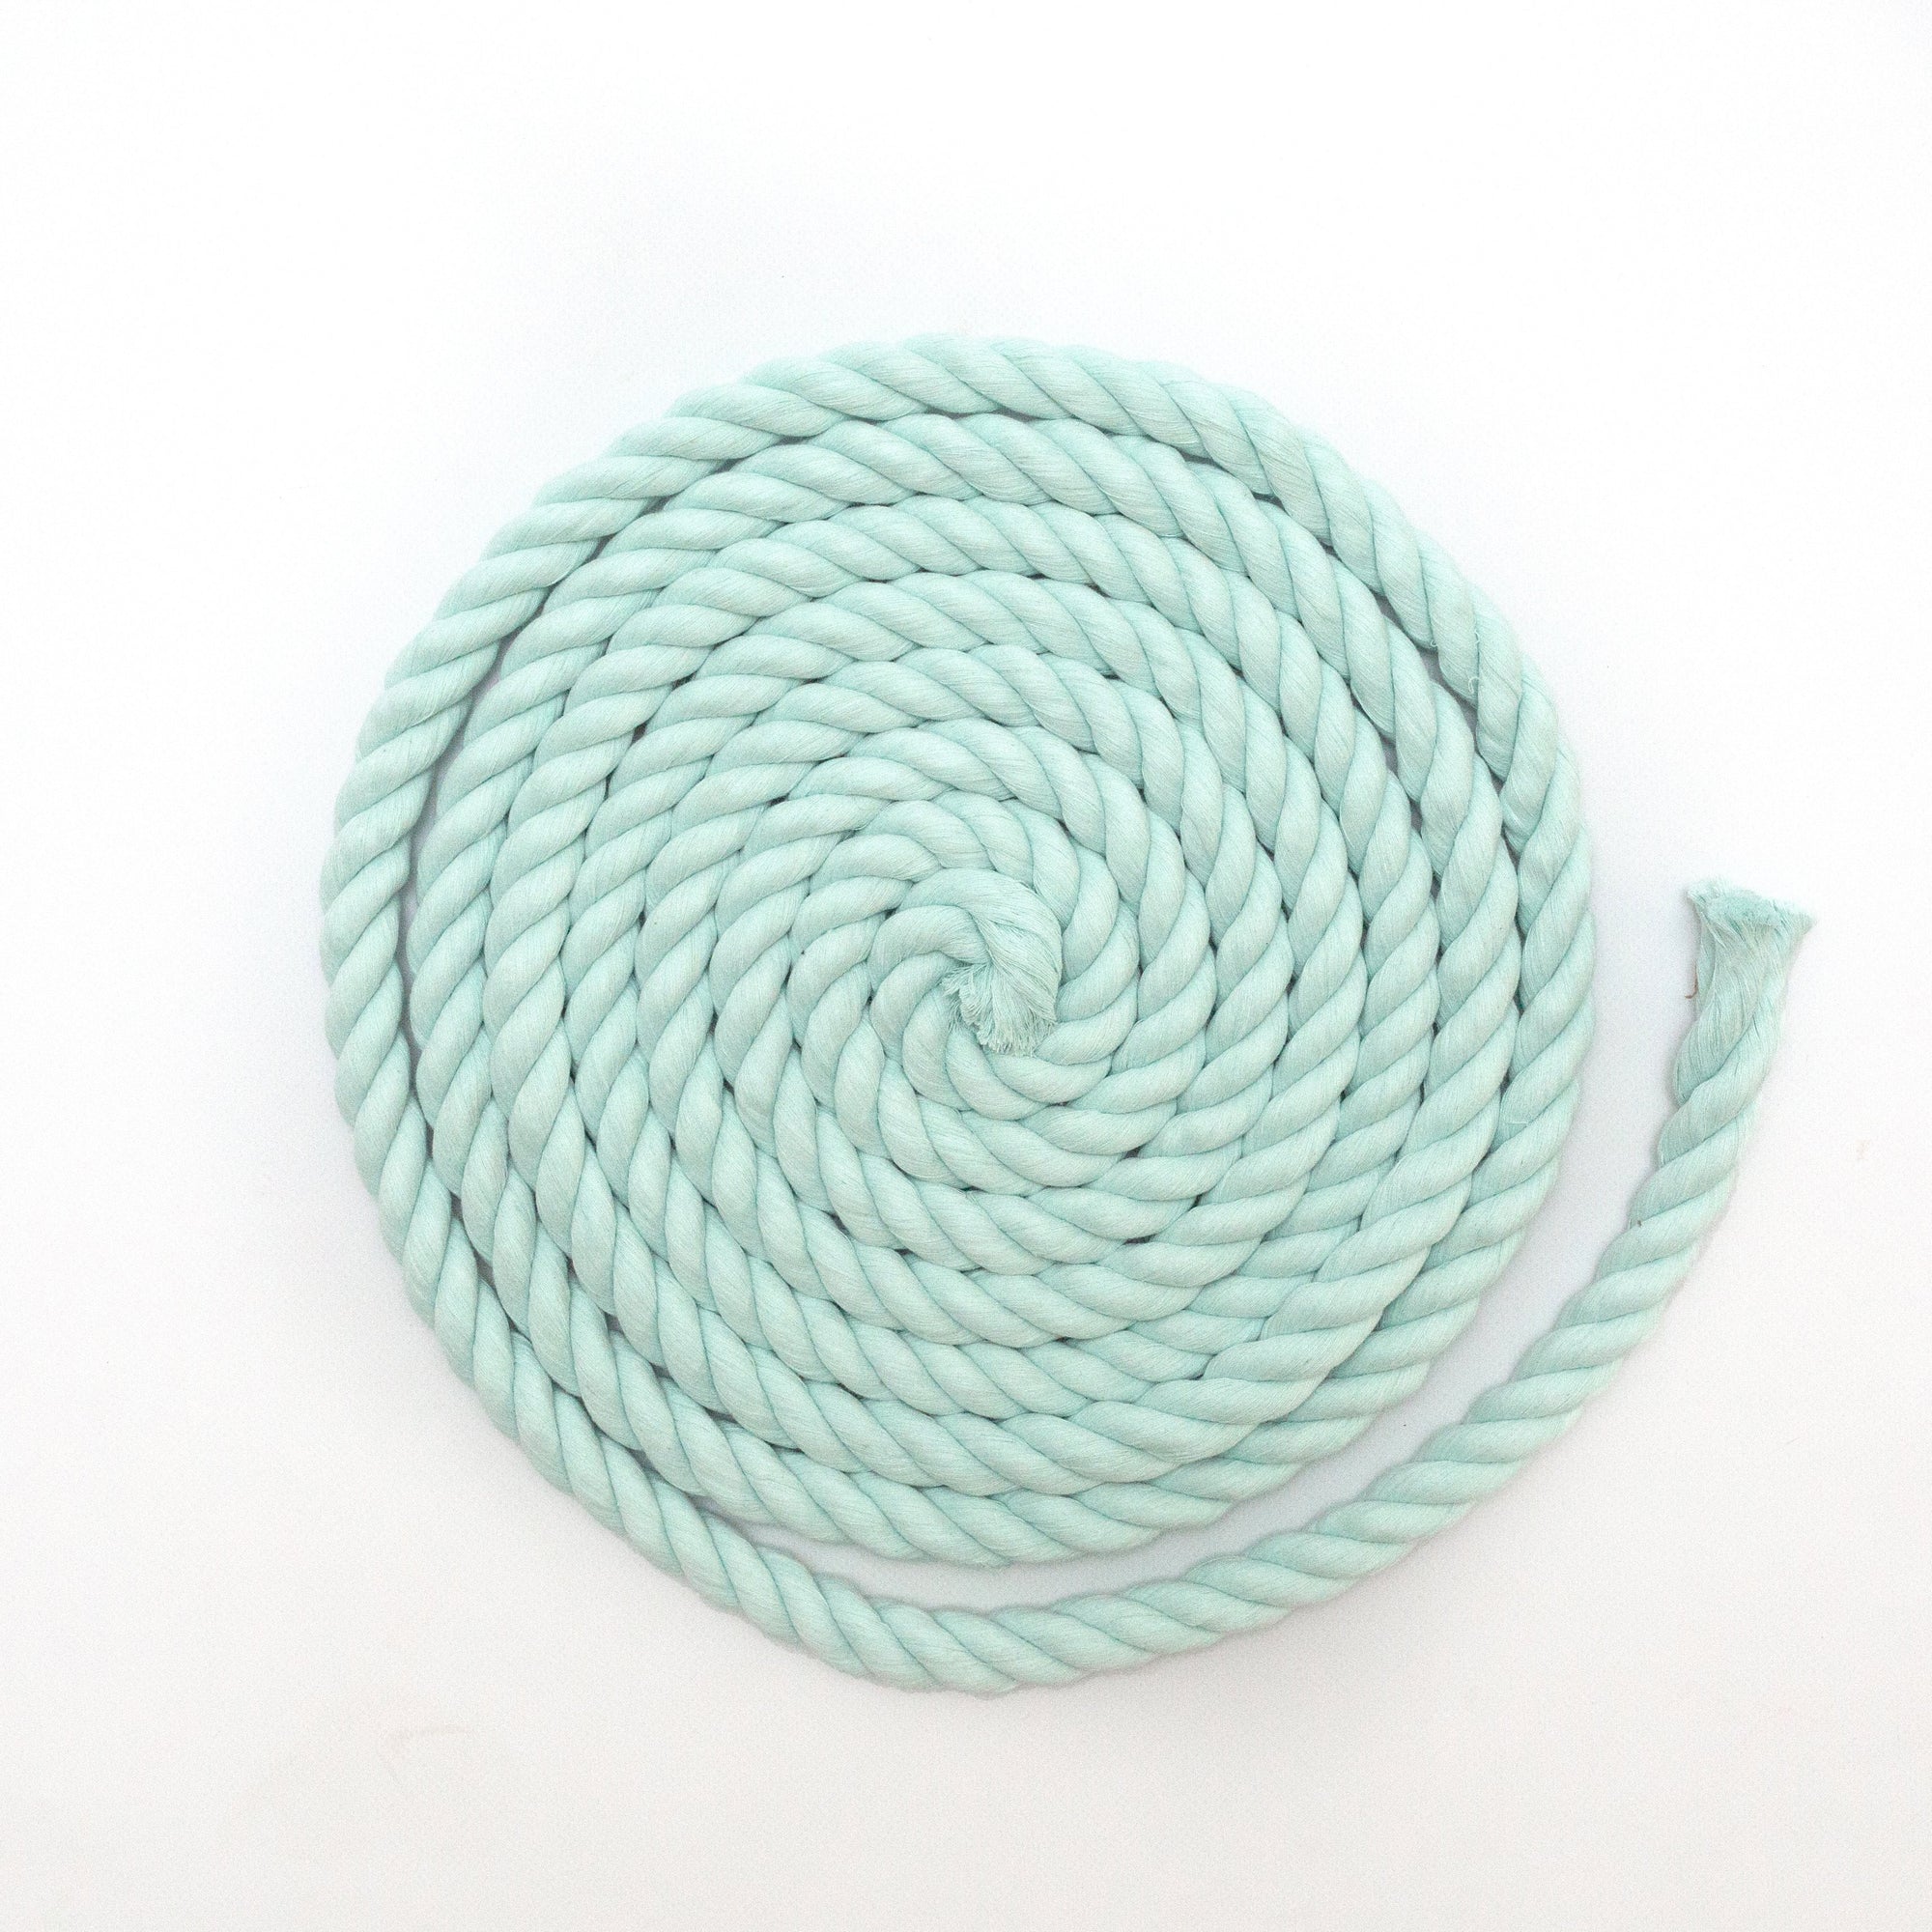 Mary Maker Studio 3Ply Twisted Rope Mint 1m 20mm Coloured Macrame Rope macrame cotton macrame rope macrame workshop macrame patterns macrame